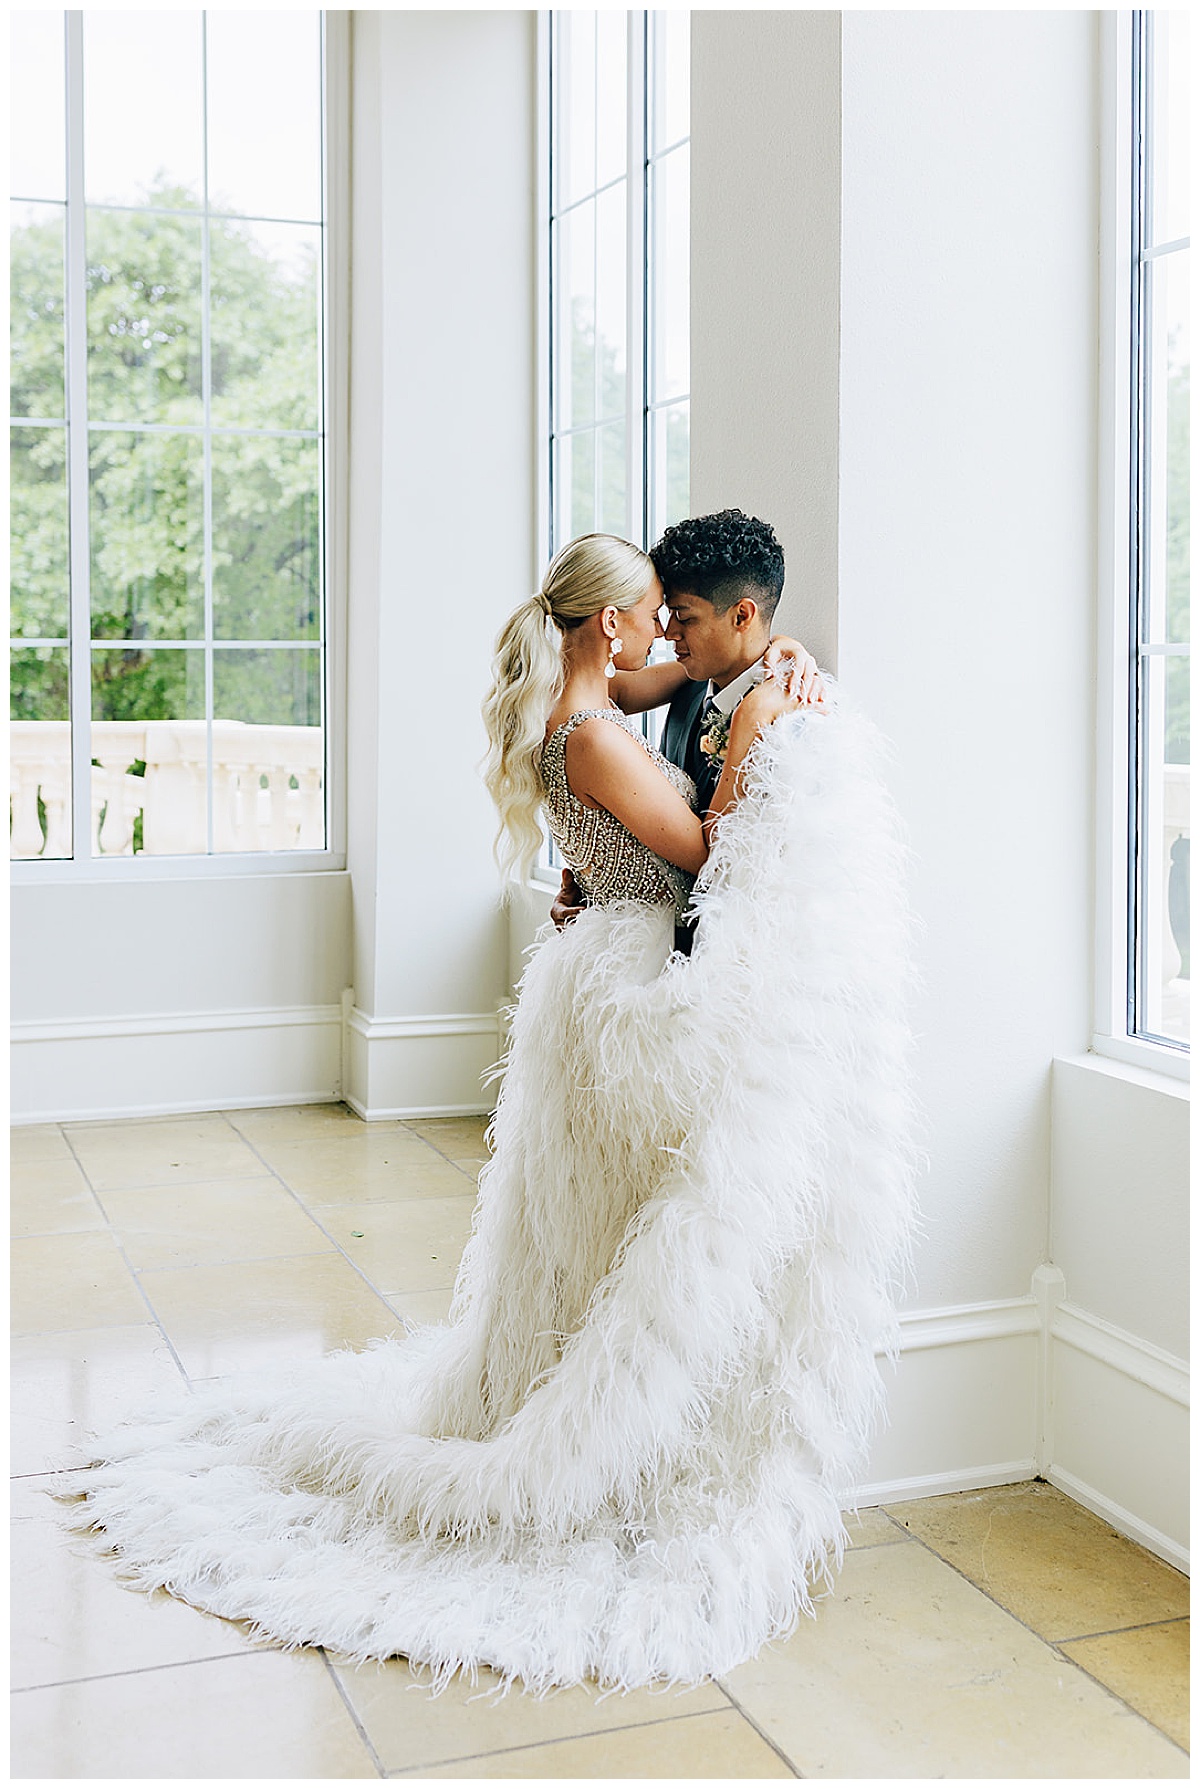 Woman wraps bridal gown around her and her husband for Kayla Bouren Photography